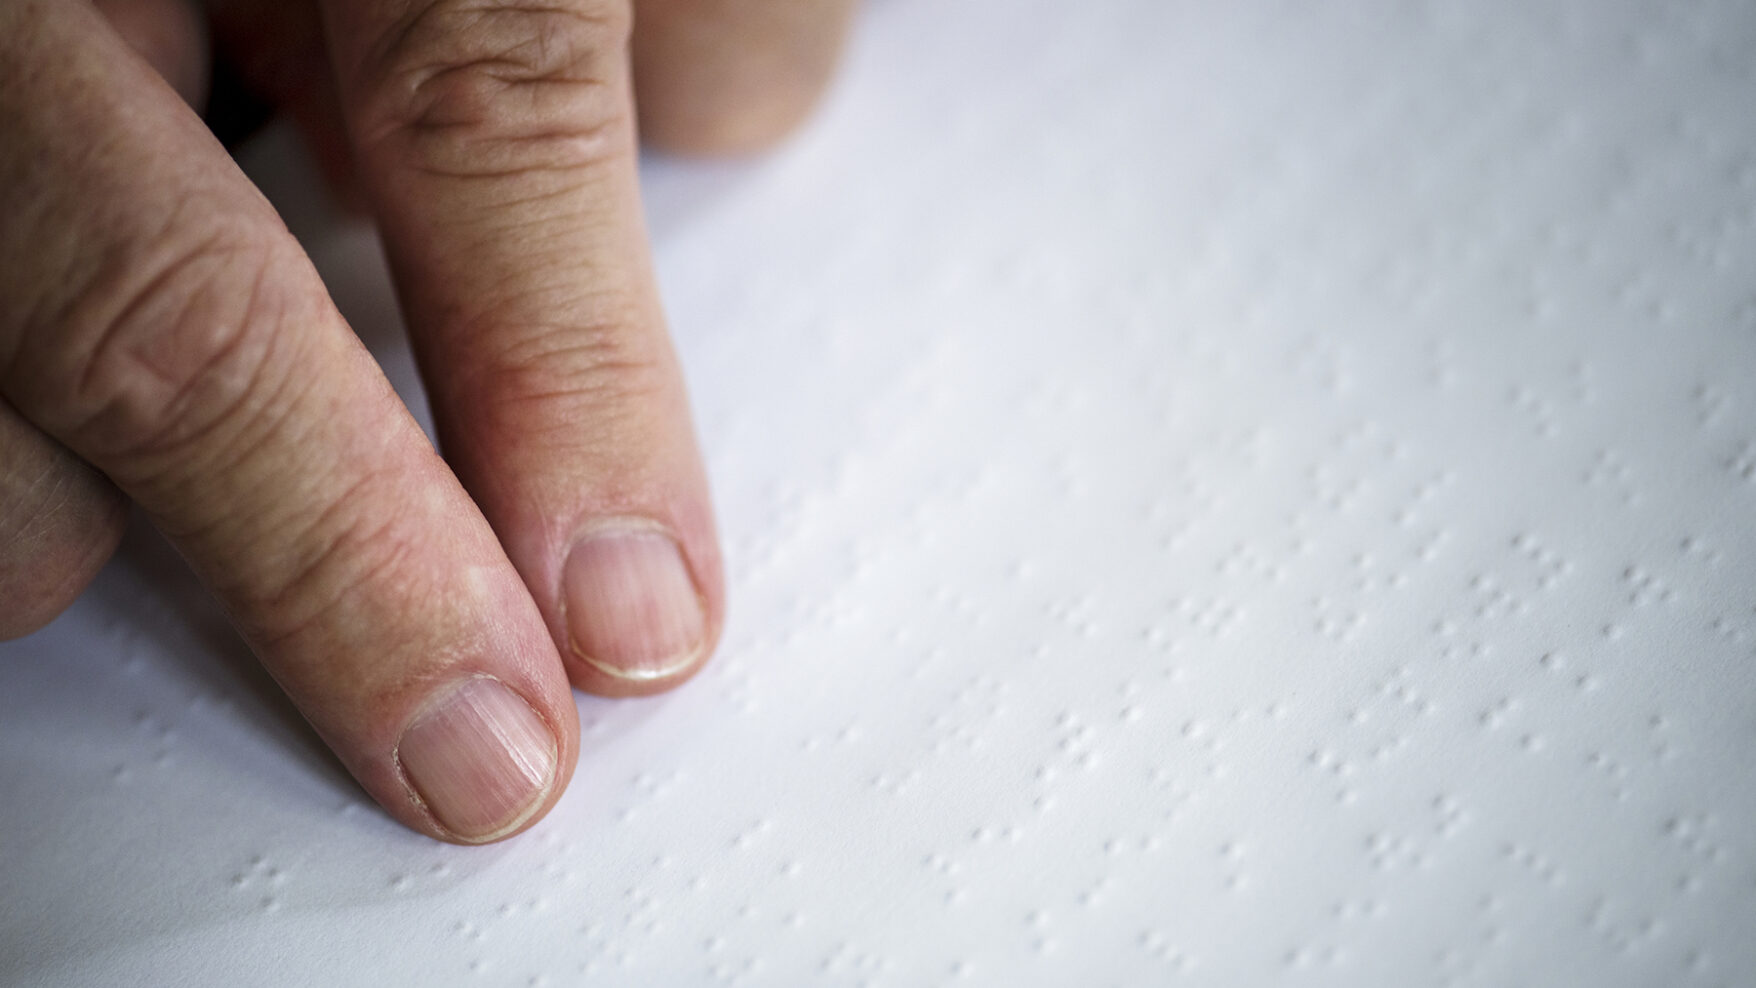 photo of someone reading braille with their fingers